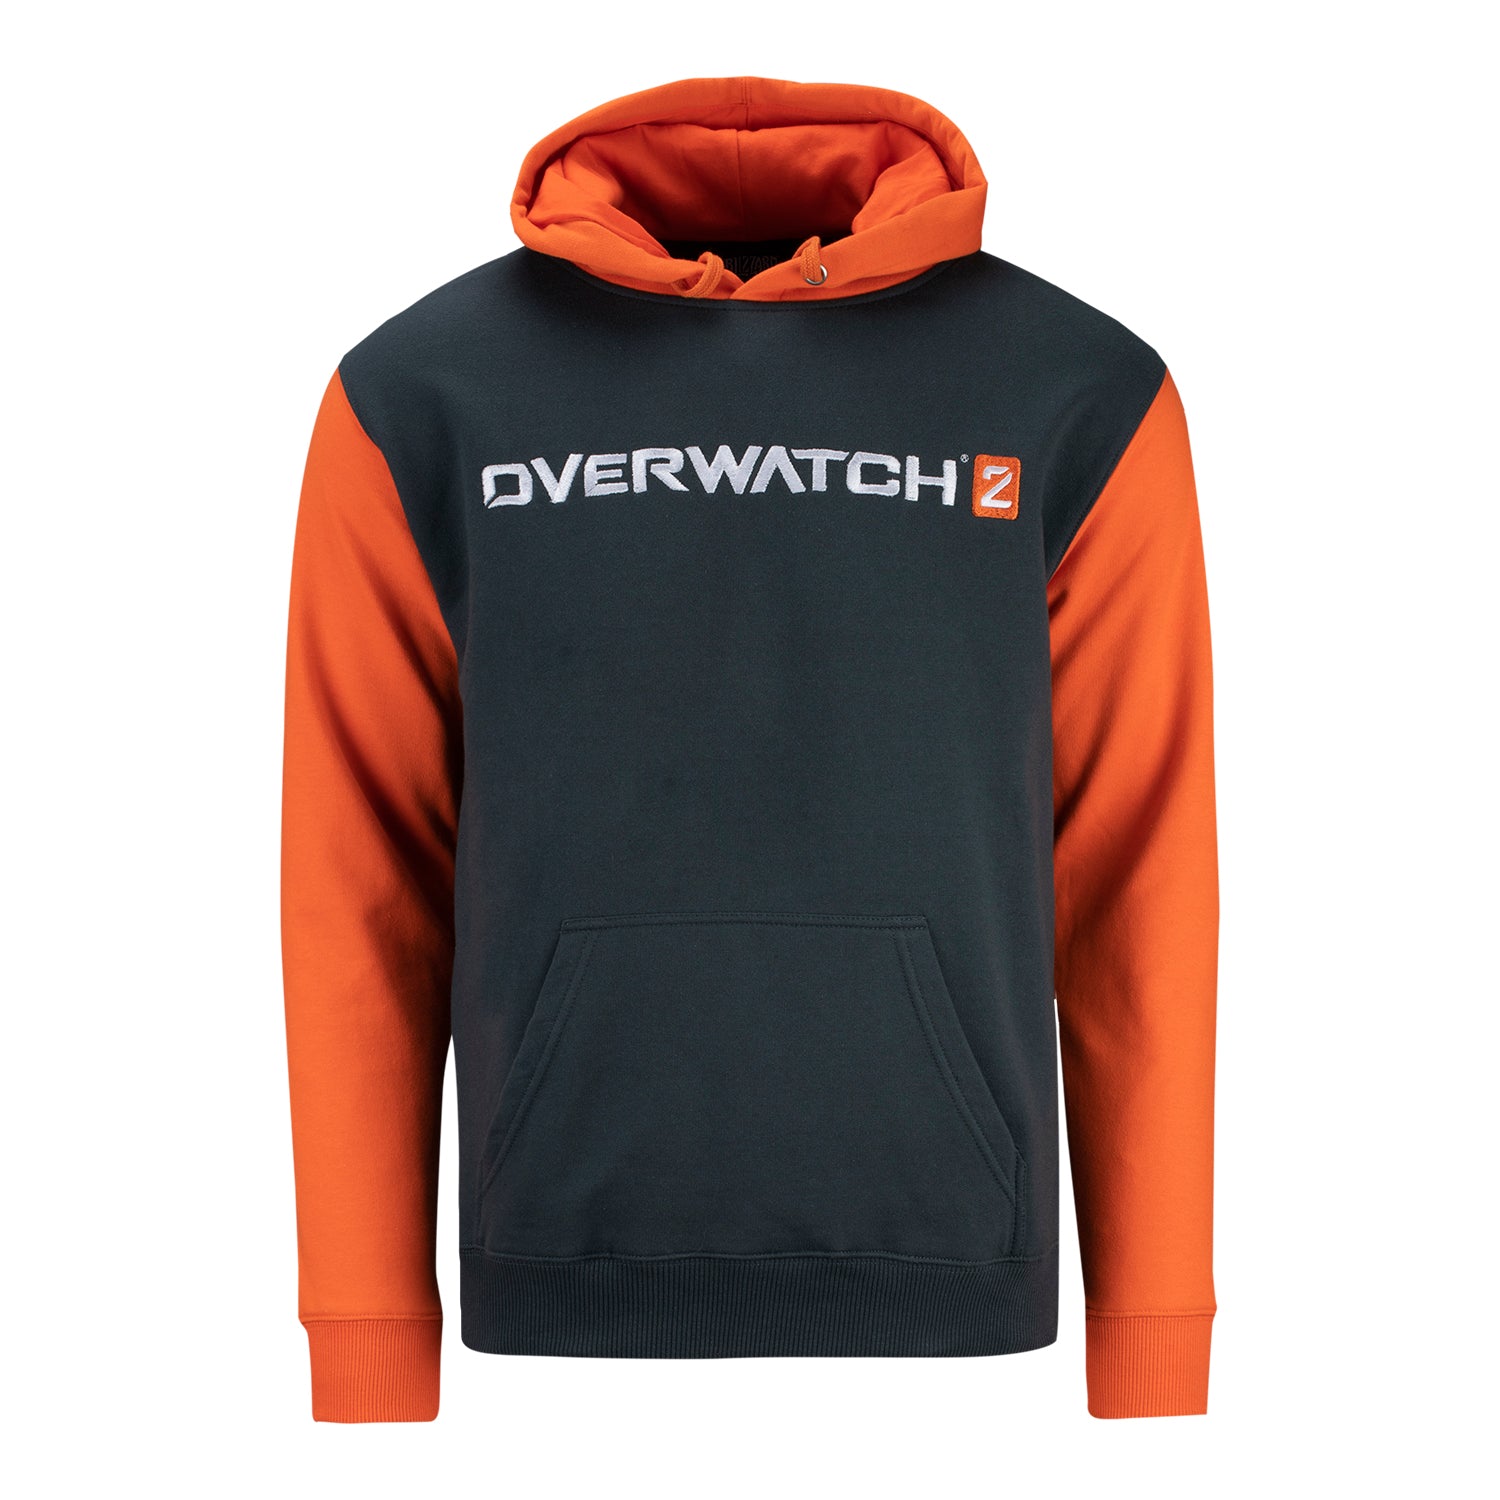 Overwatch 2 Charcoal Colorblock Hoodie - Front View